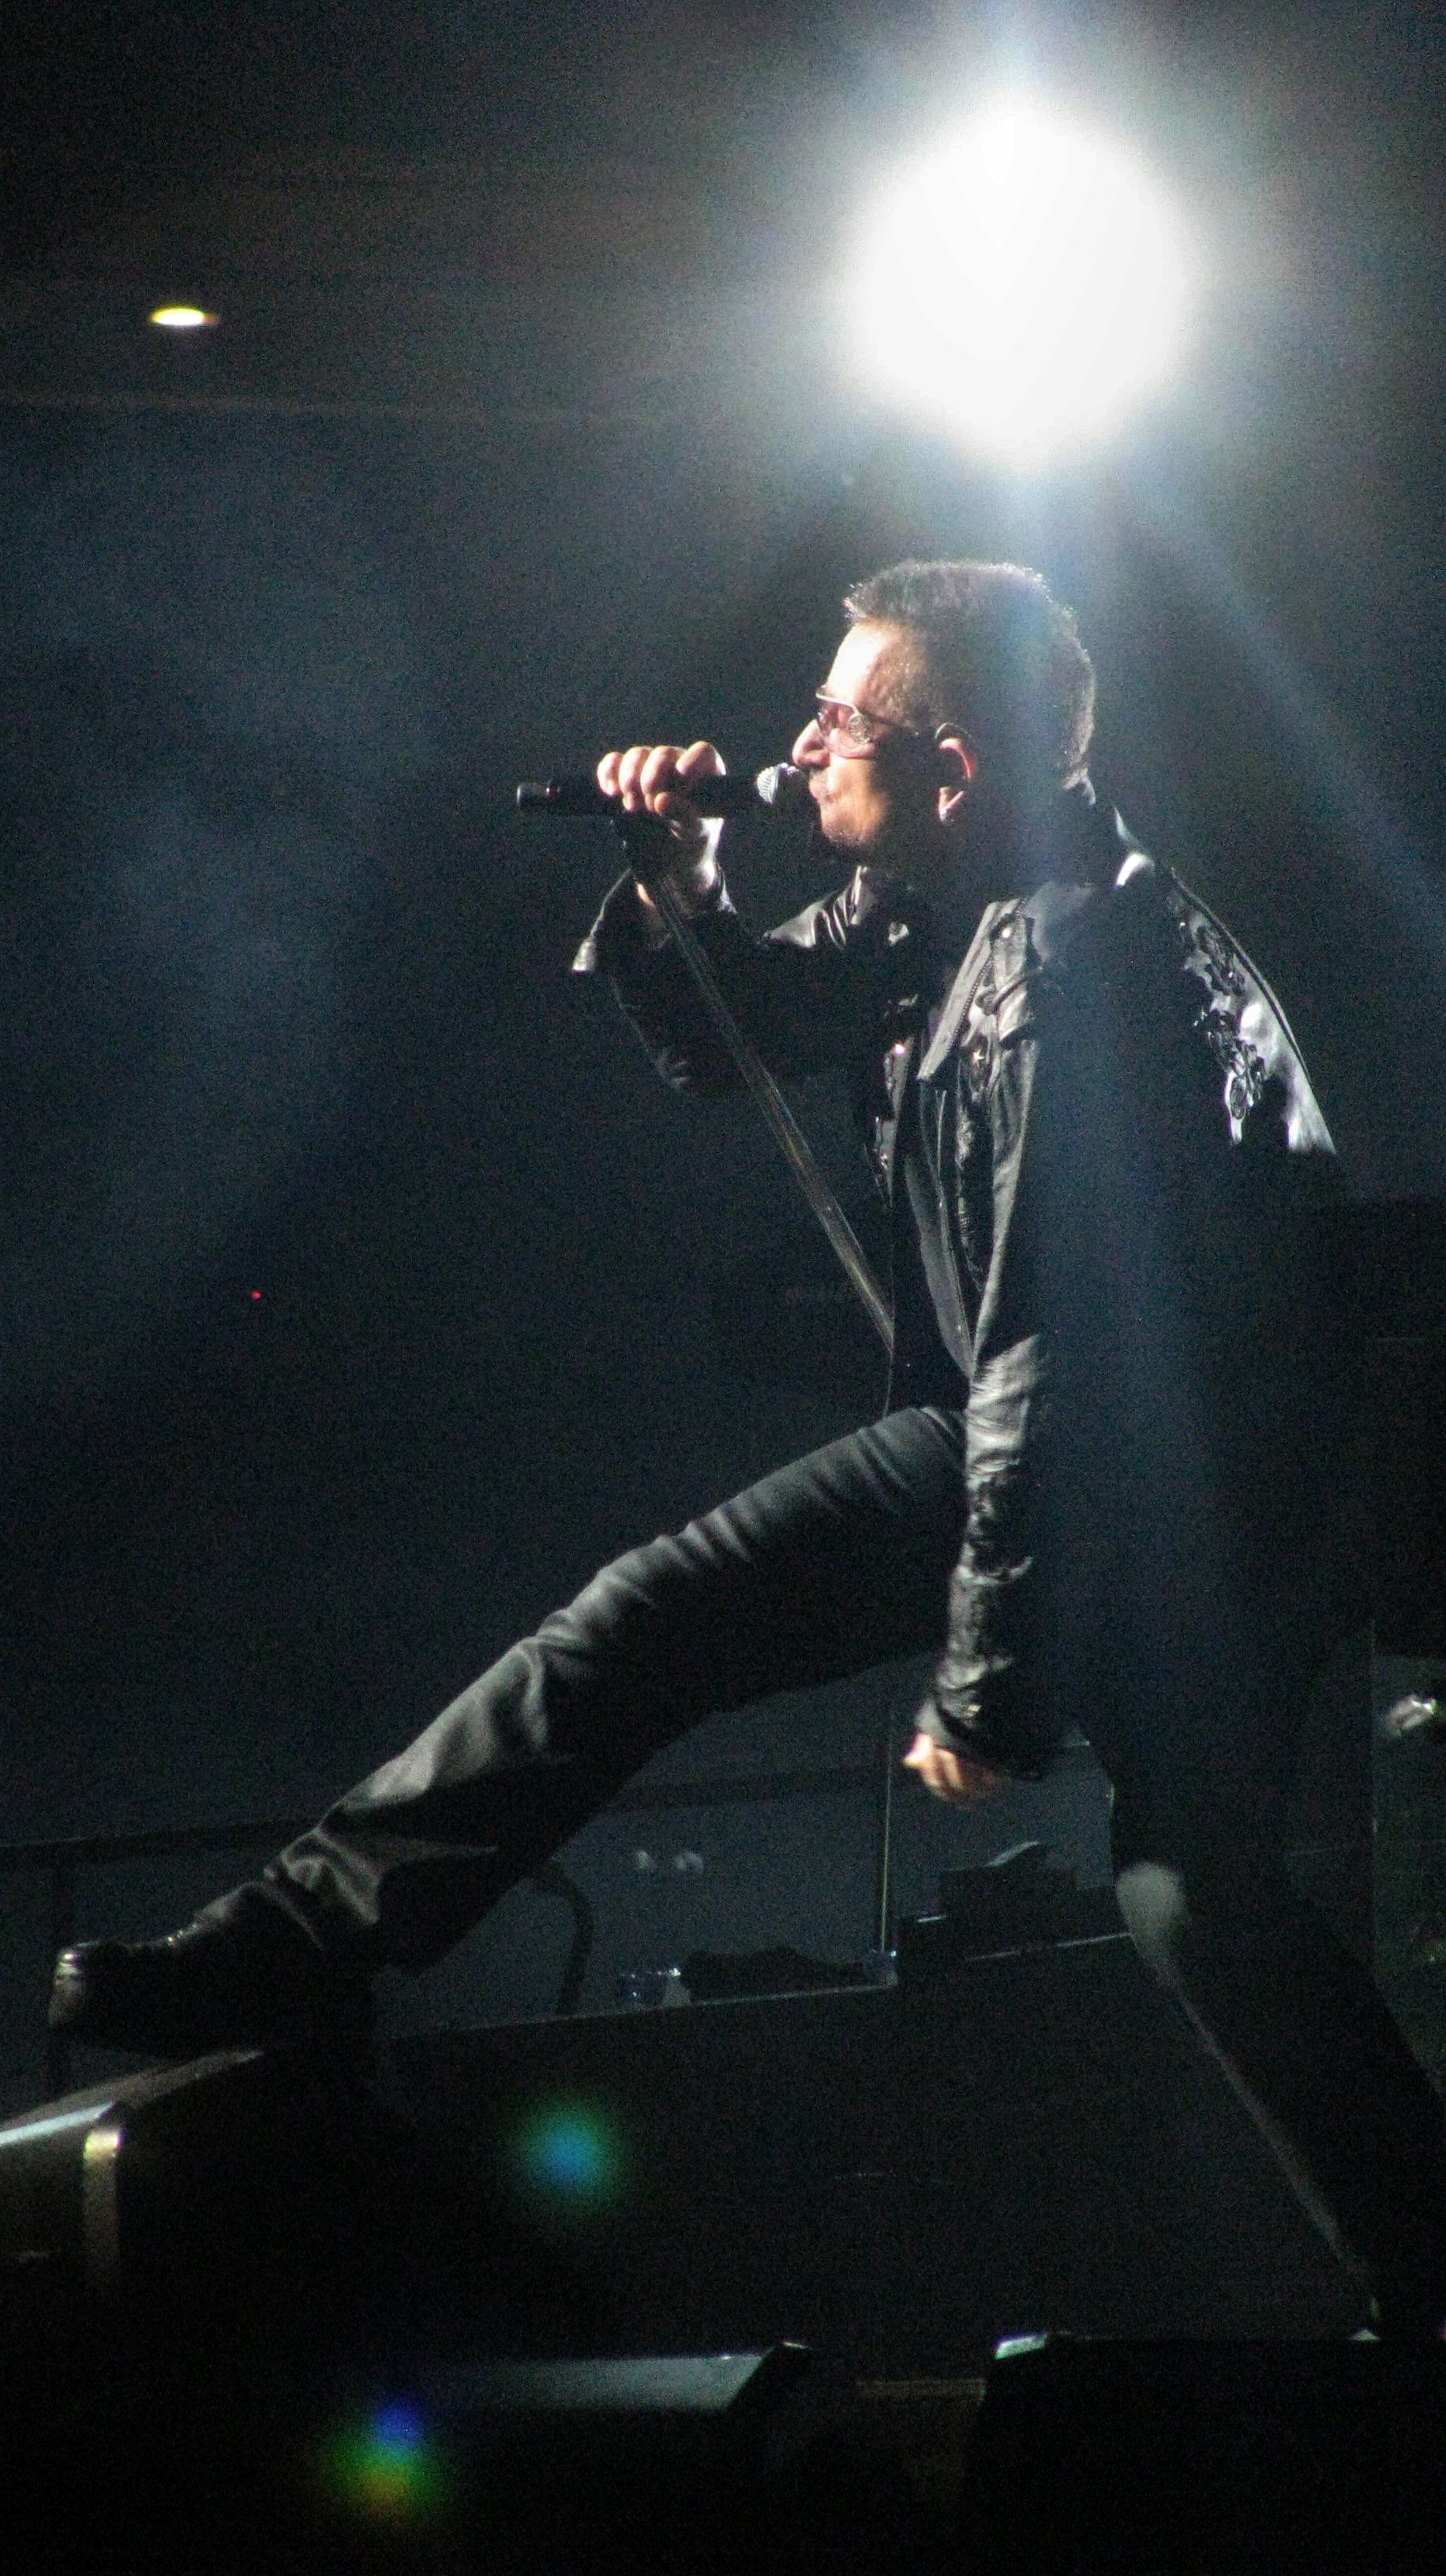 Bono_getting_a_leg_up__by_thecitizeneraser.jpg